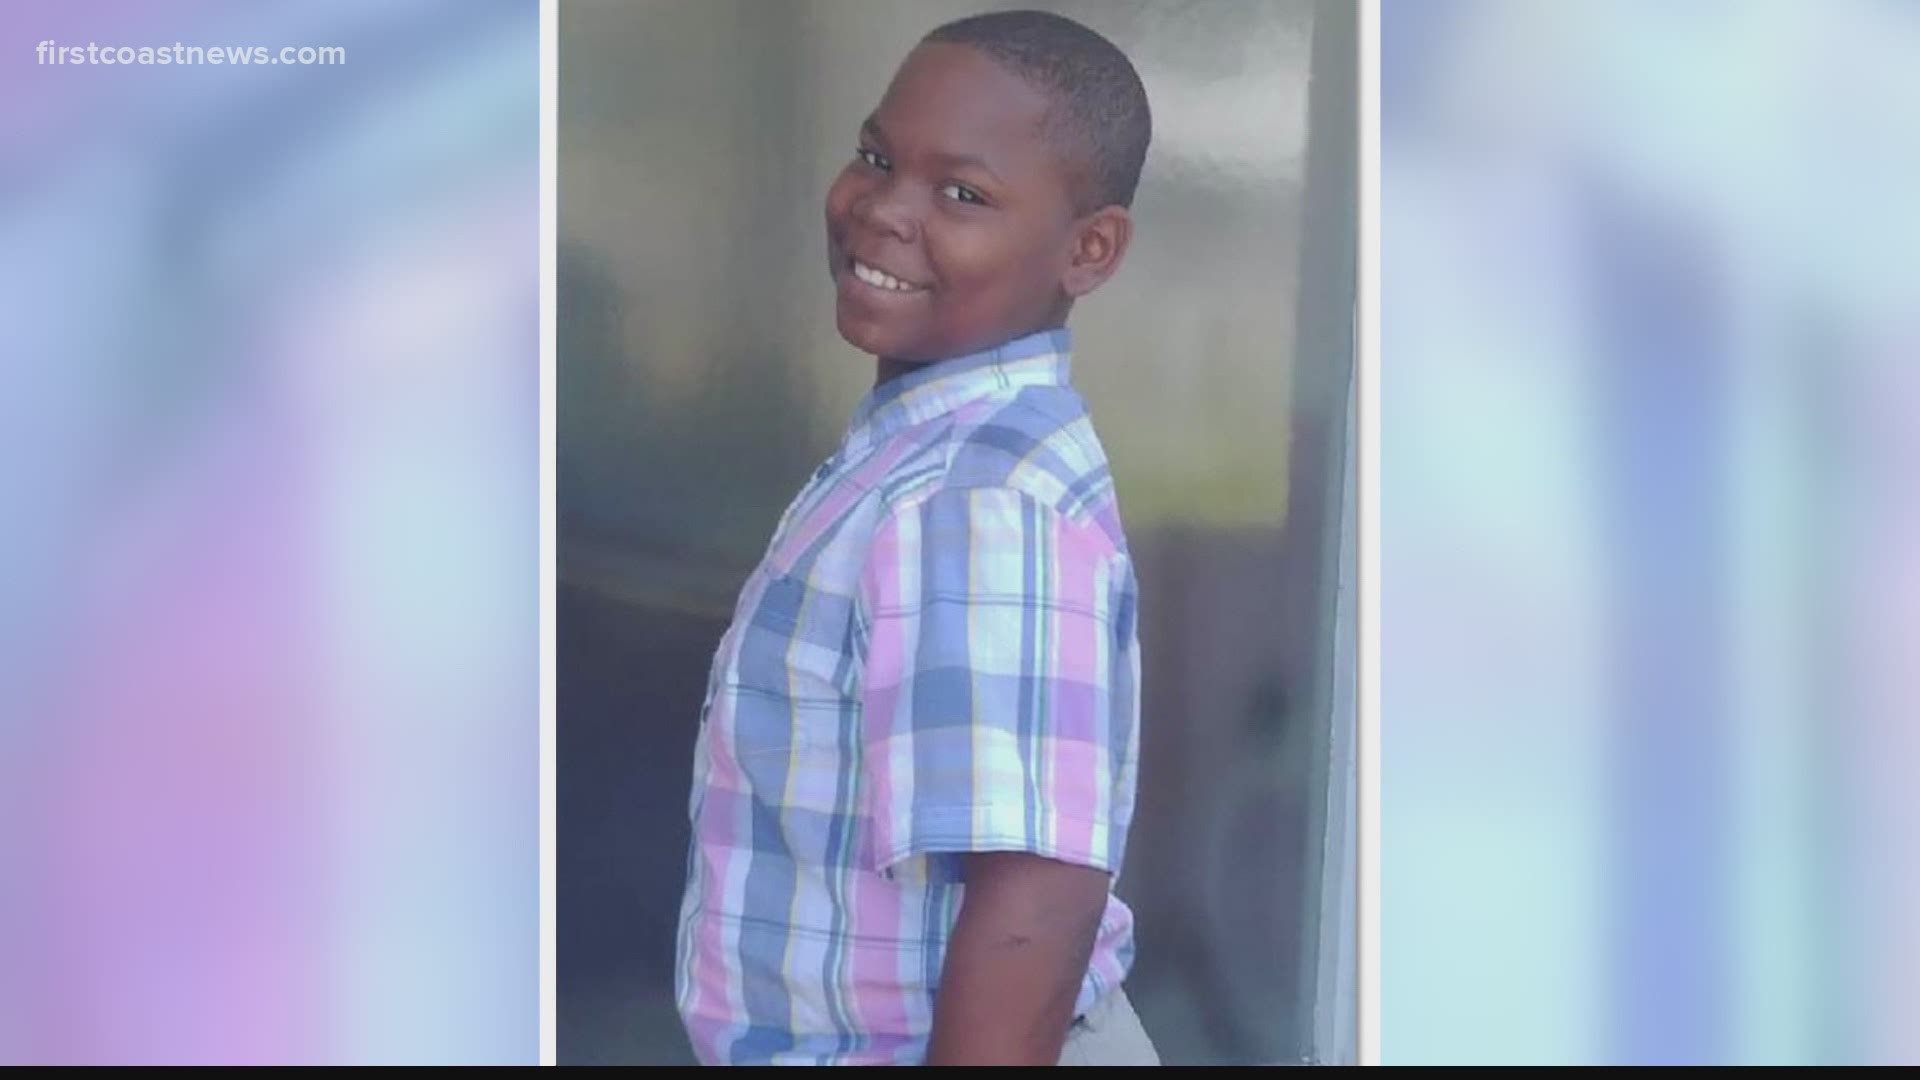 The sheriff's office now wants to know the whereabouts of 11-year-old Keavon Washington's mother Keyera Cue, 35, and his father Franklyn Daley, 31.